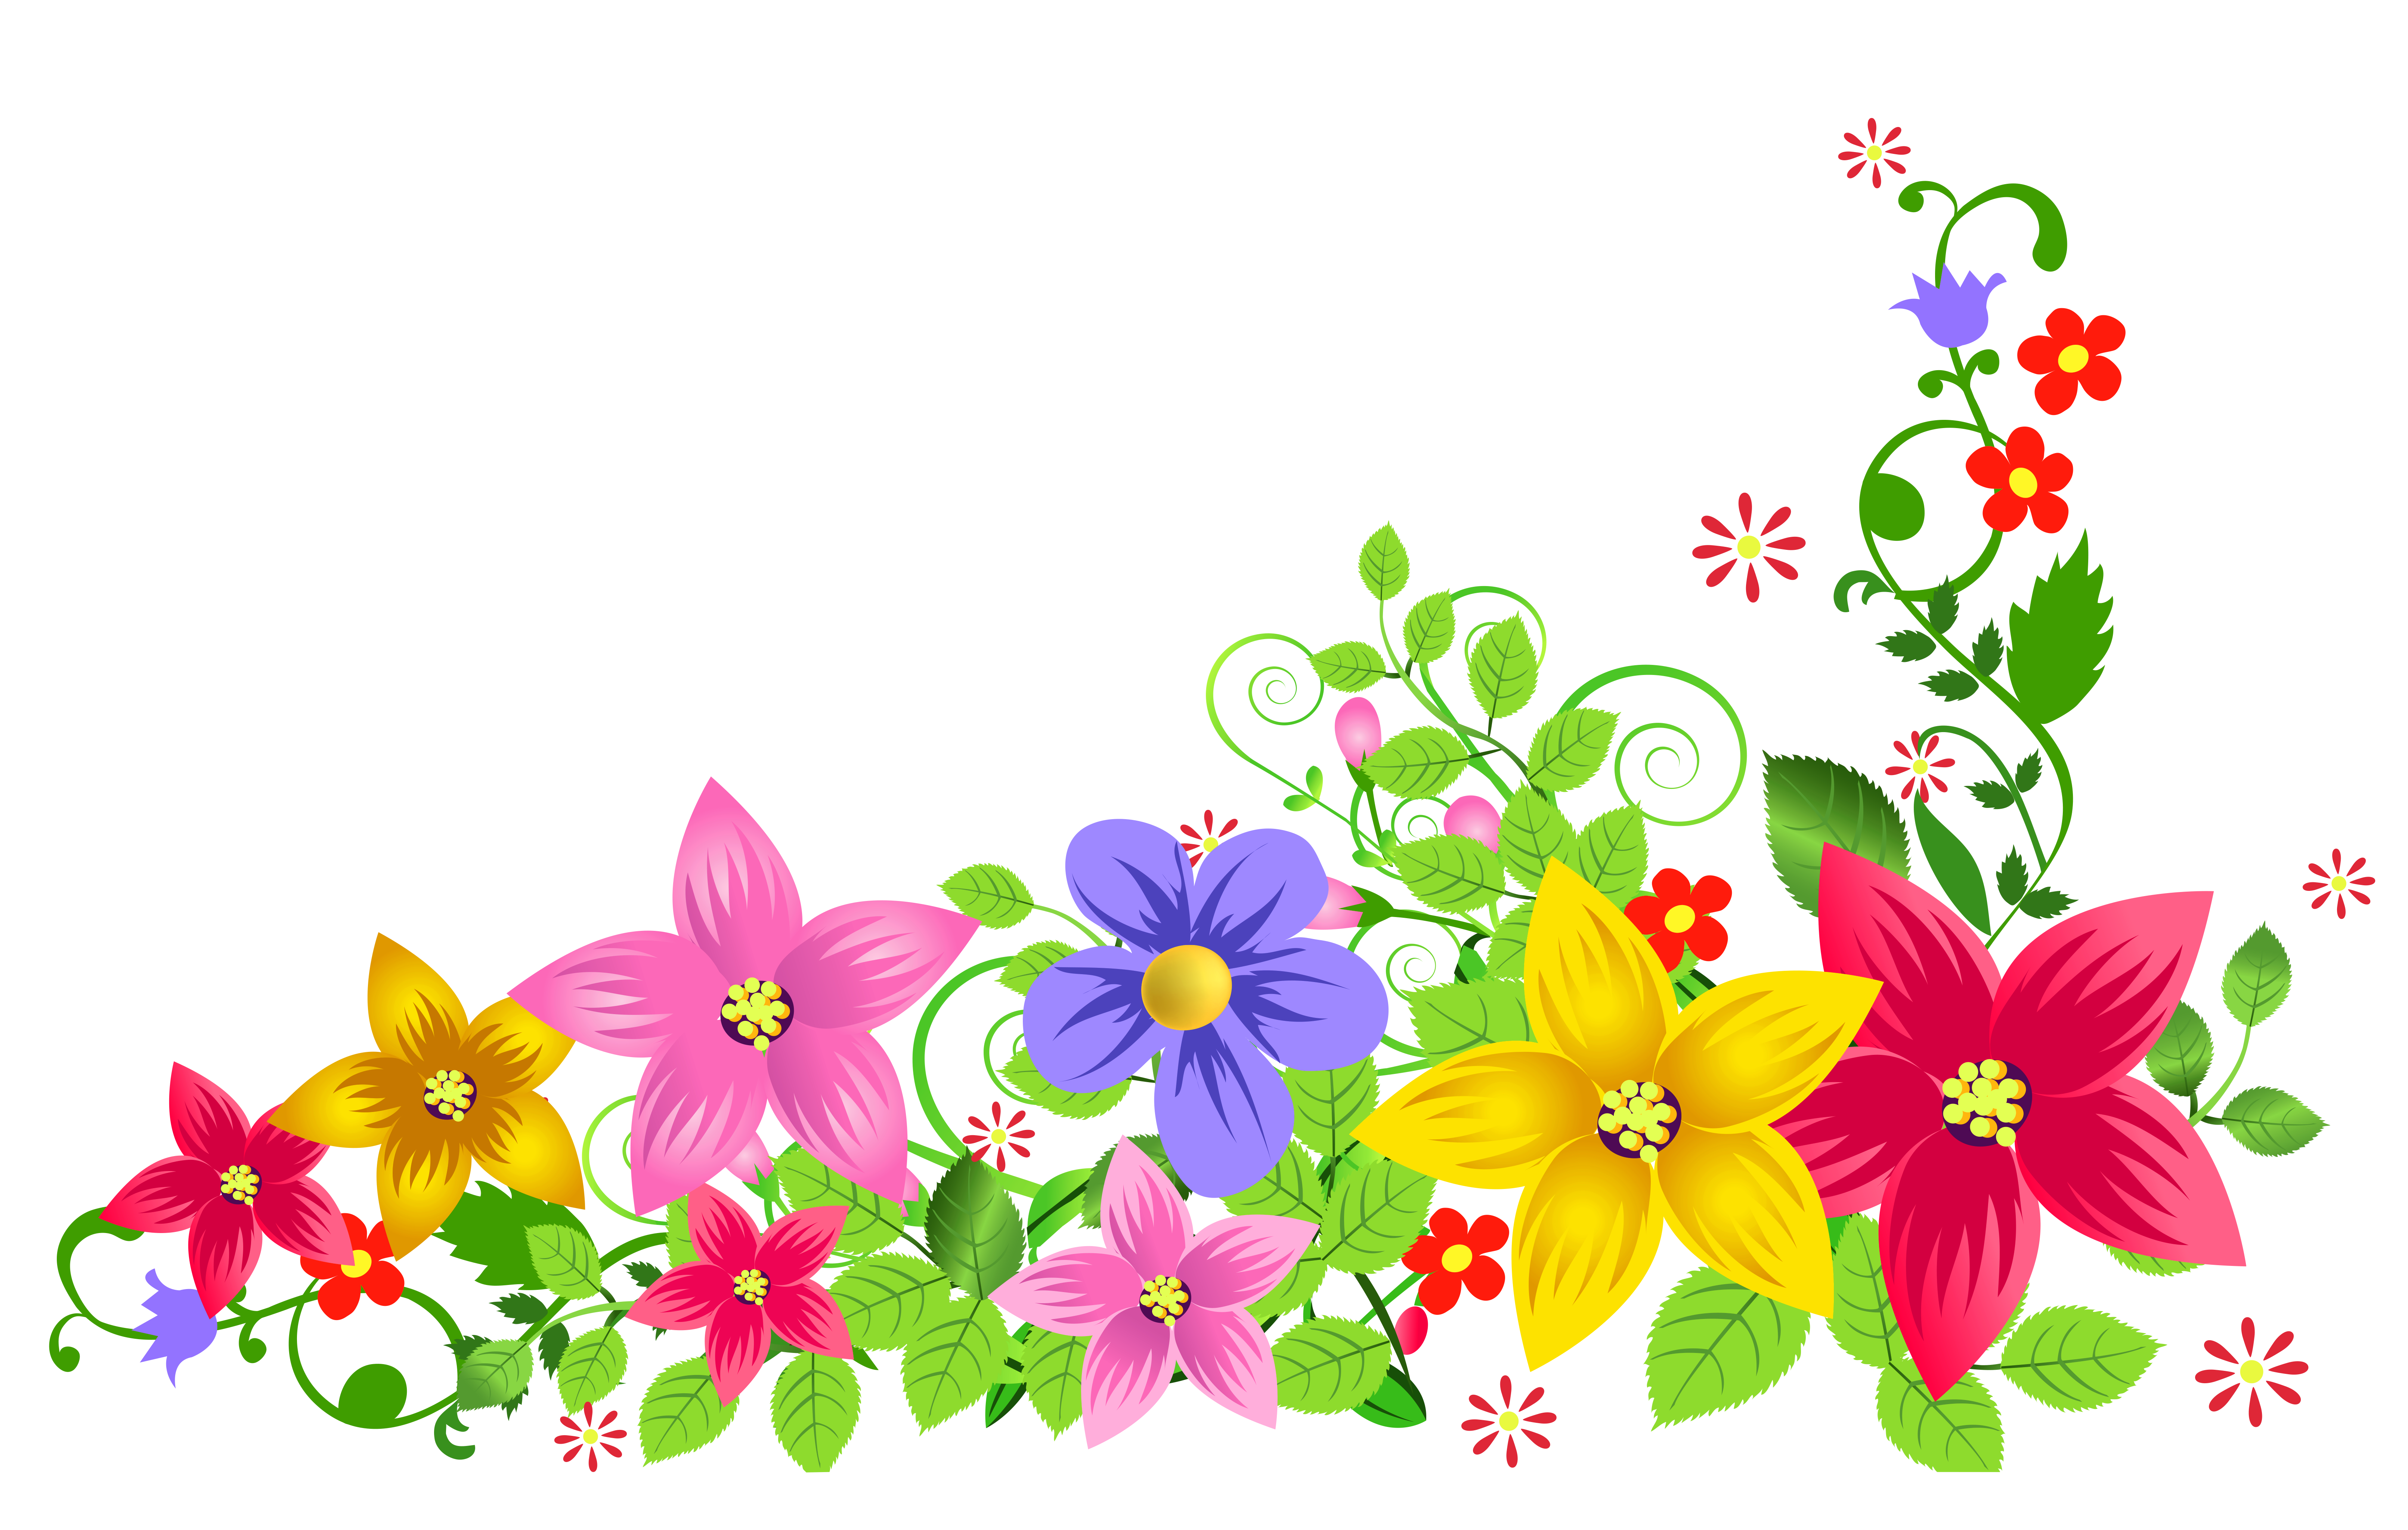 Download Floral Transparent Image HQ PNG Image in different resolution